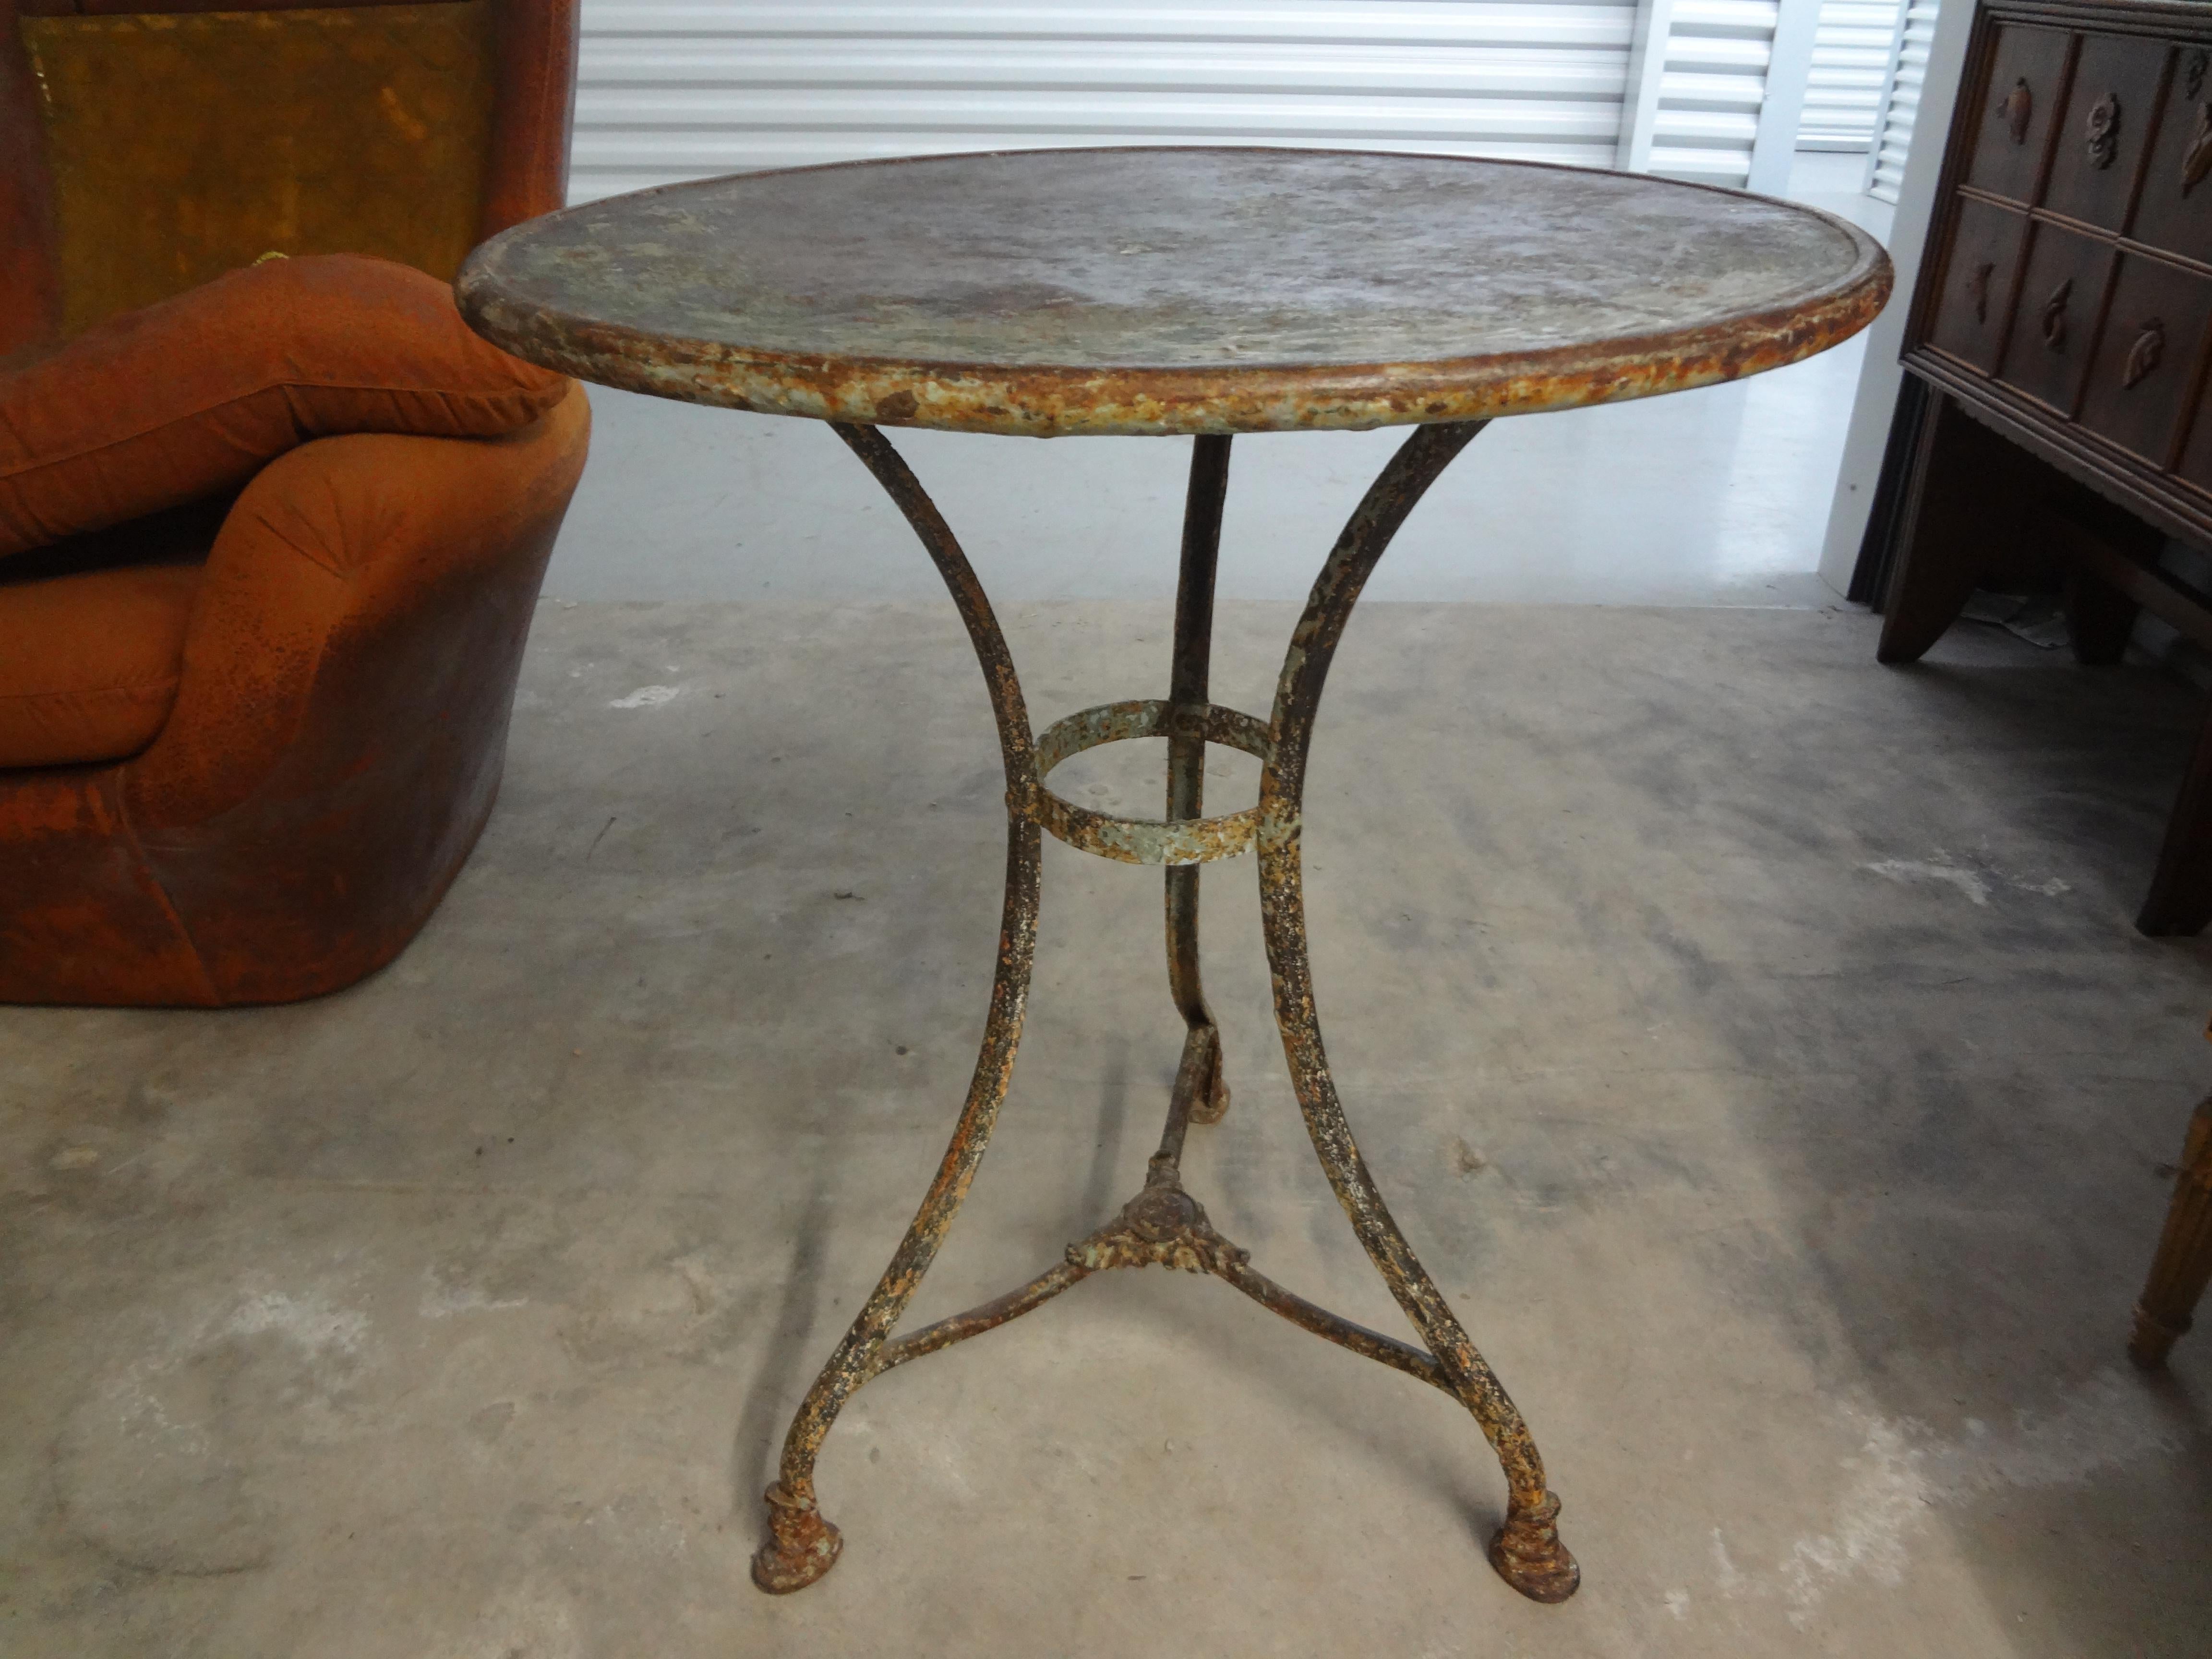 19th Century French Garden Table By Arras Foundry.
This beautiful French wrought iron and cast iron garden table or bistro table is in great condition and has fabulous patina, graceful lines and signature Arras feet.
Perfect for indoor or outdoor